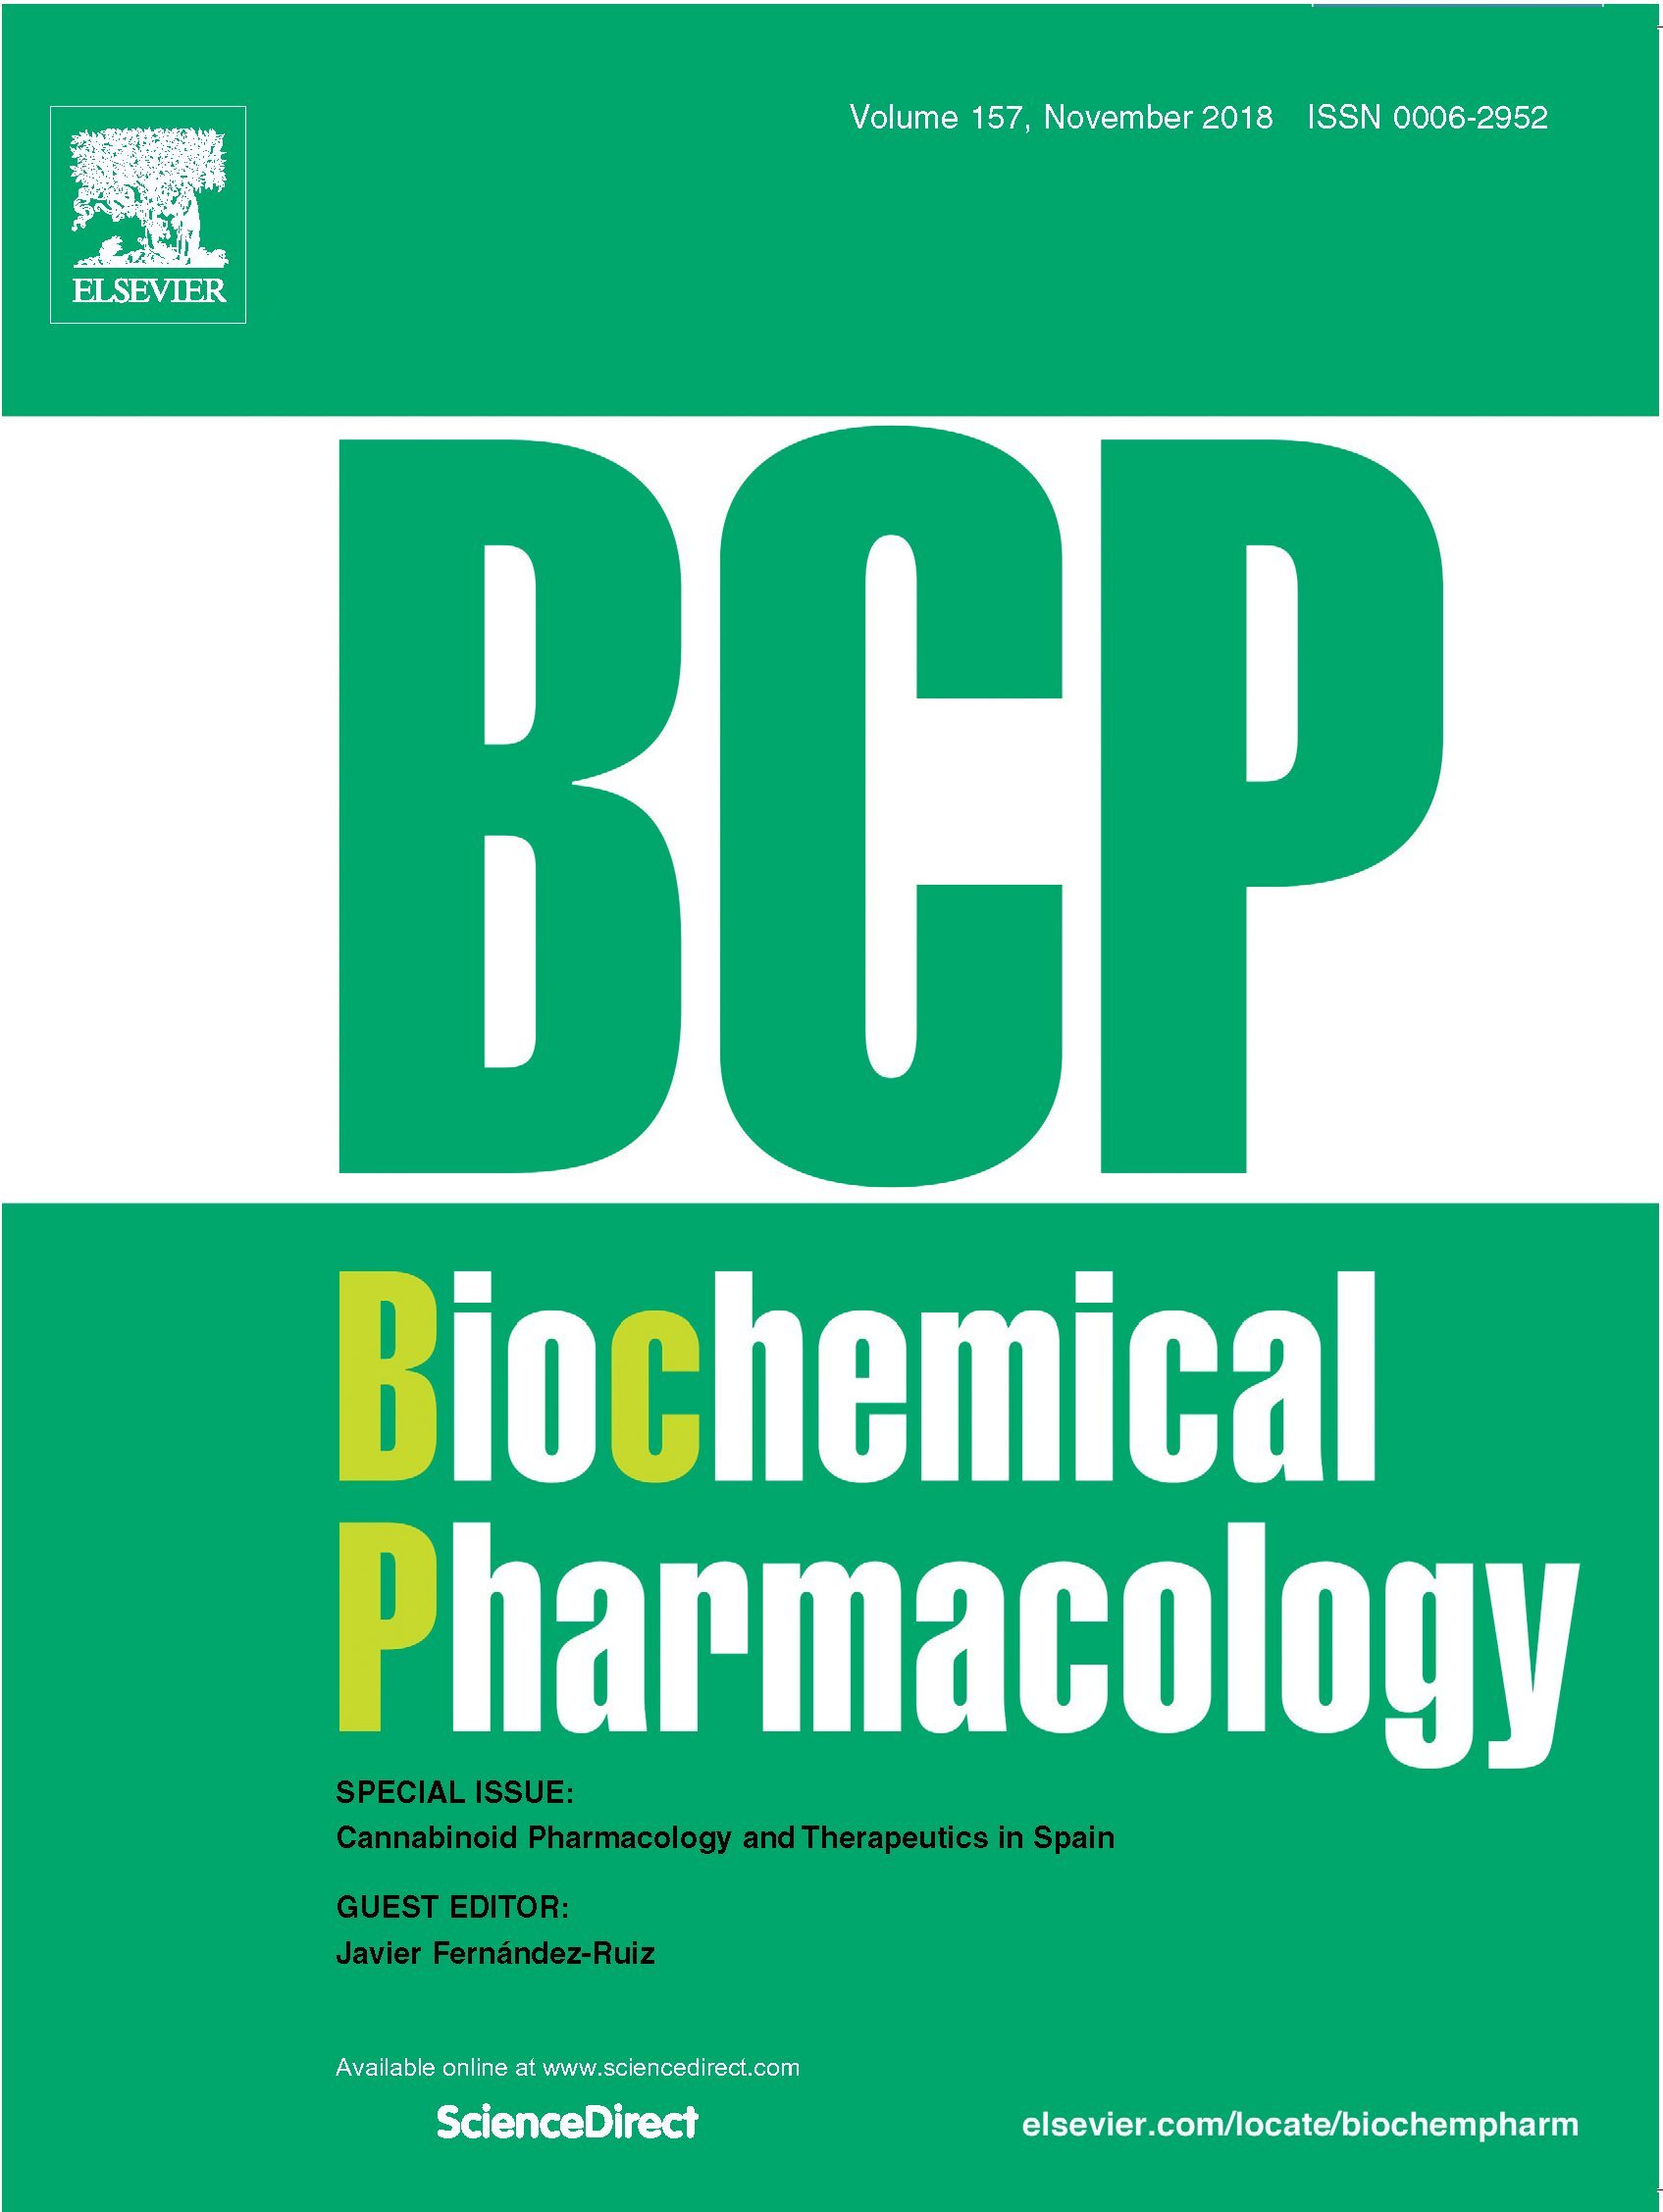 BCP cover